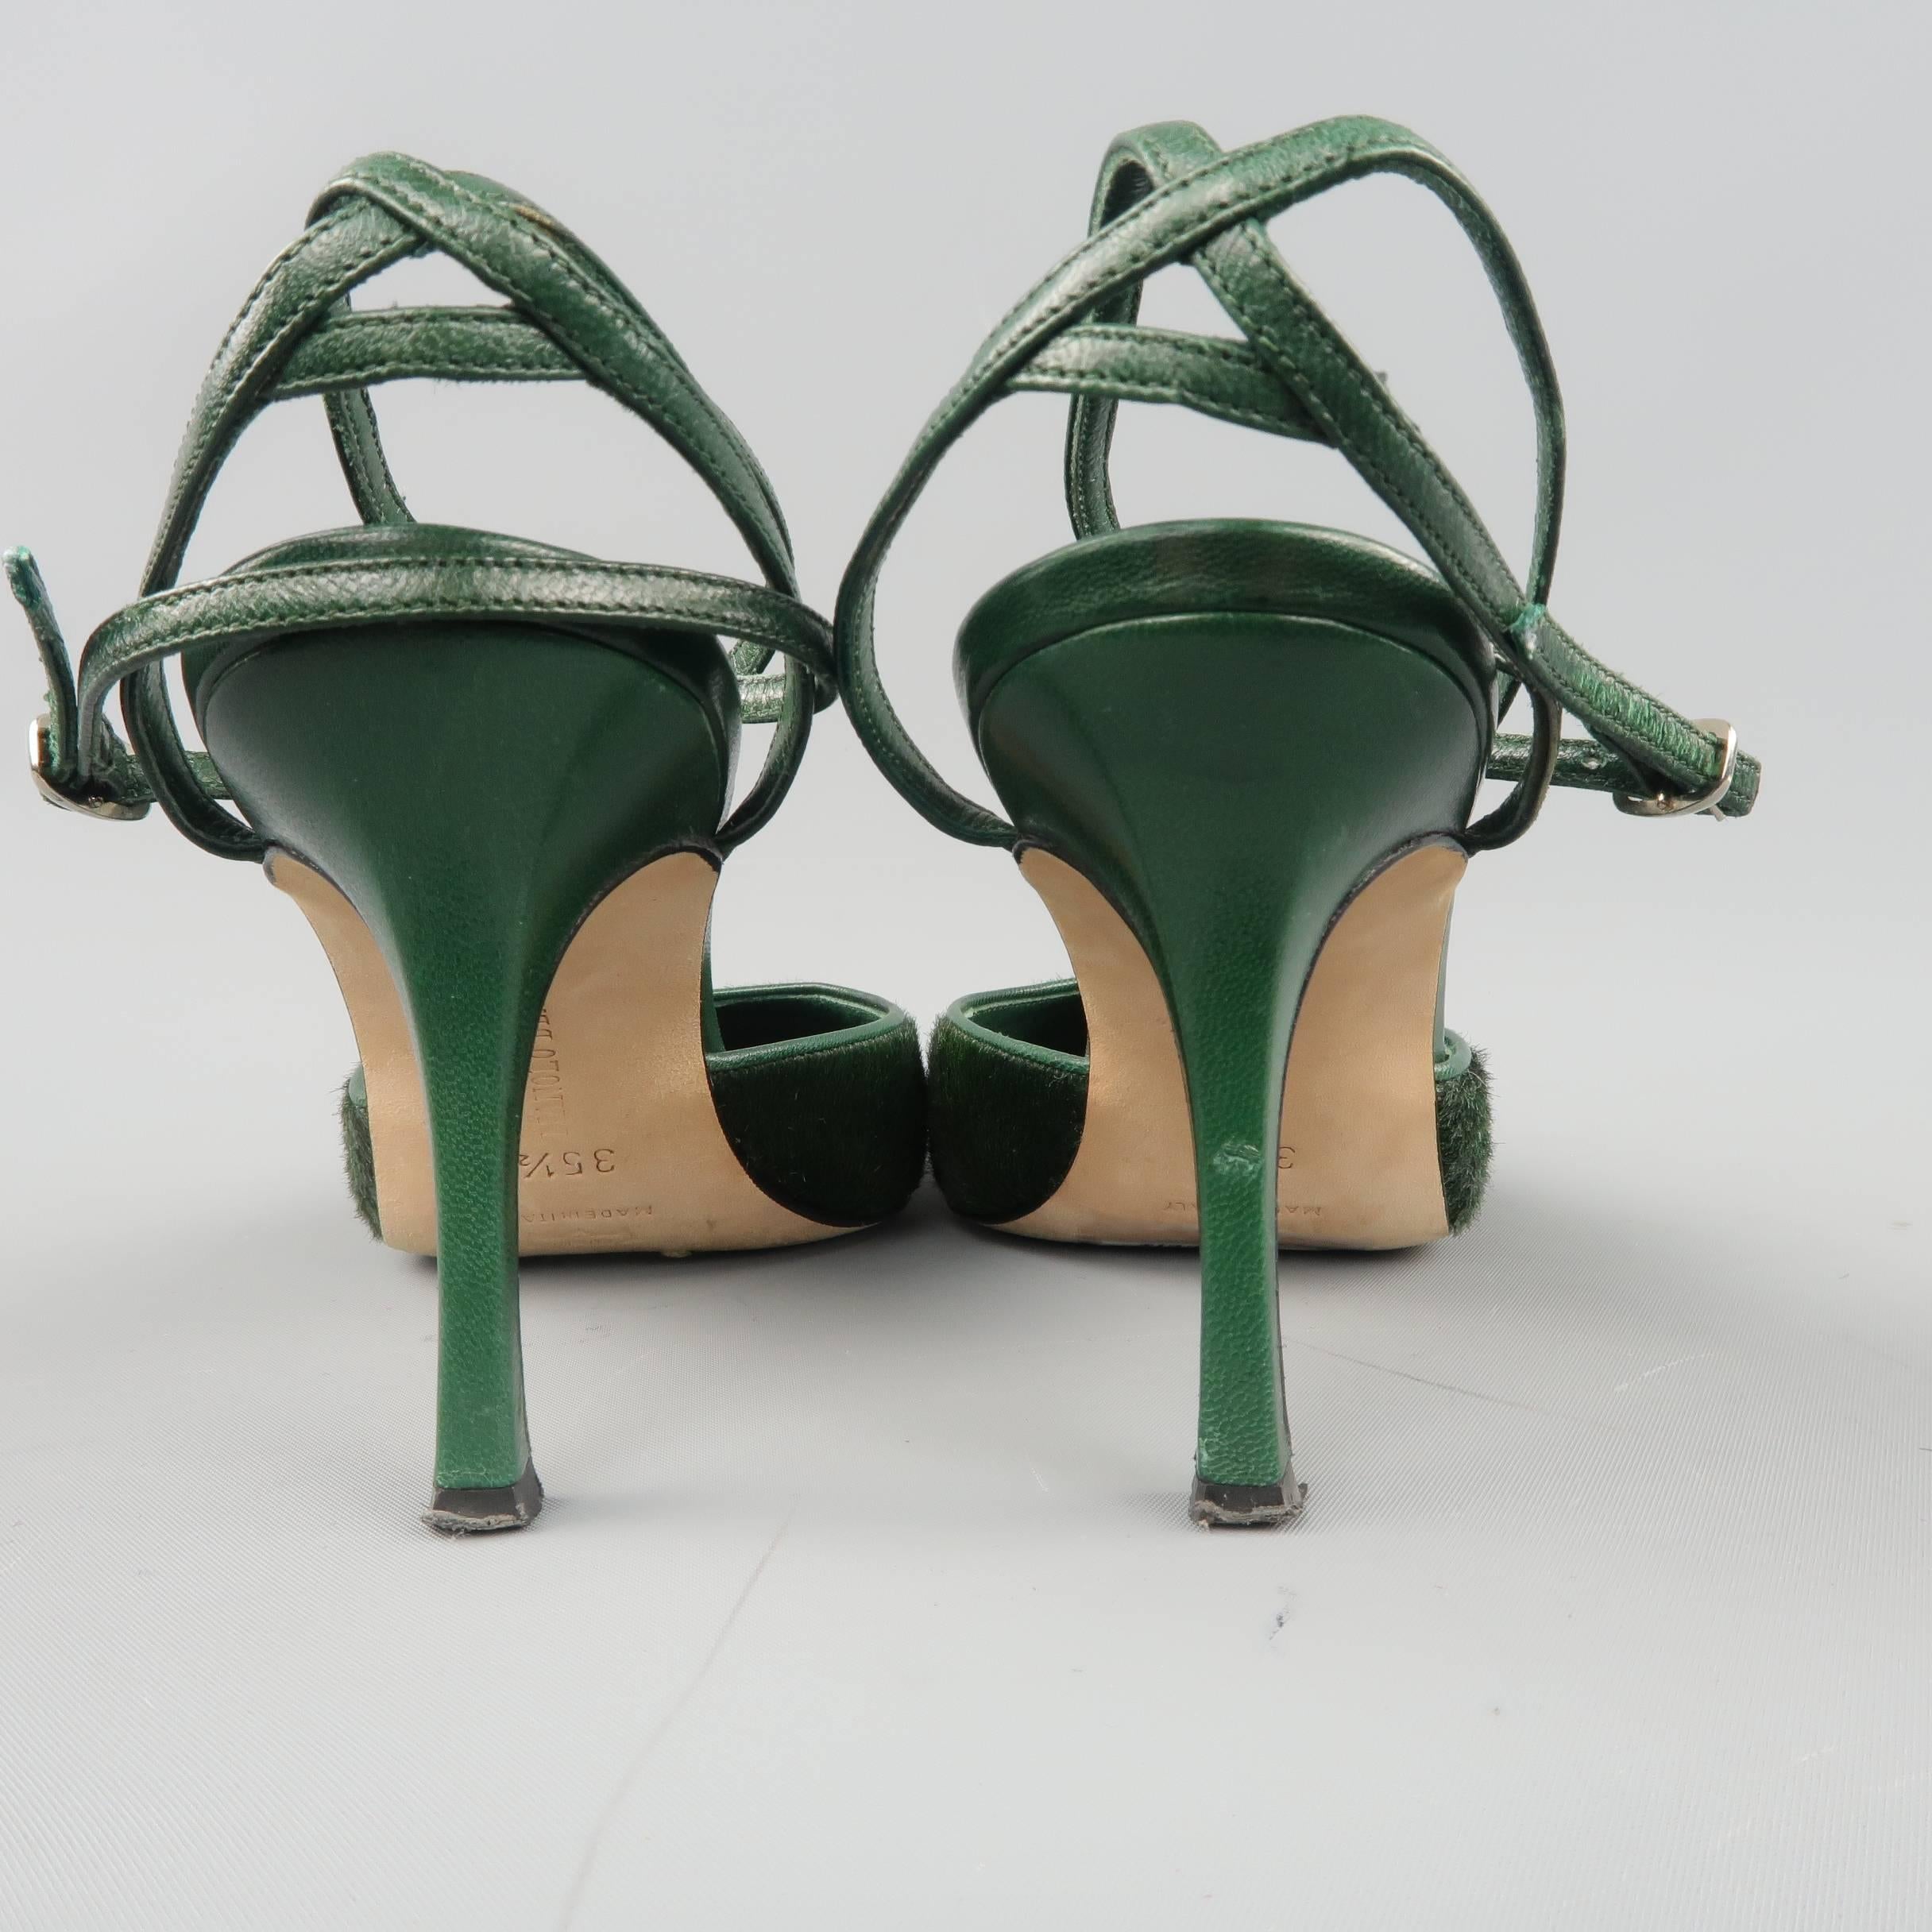 MANOLO BLAHNIK Pumps Heels Size 5.5  - Green Ponyhair & Leather Ankle Strap In Good Condition In San Francisco, CA